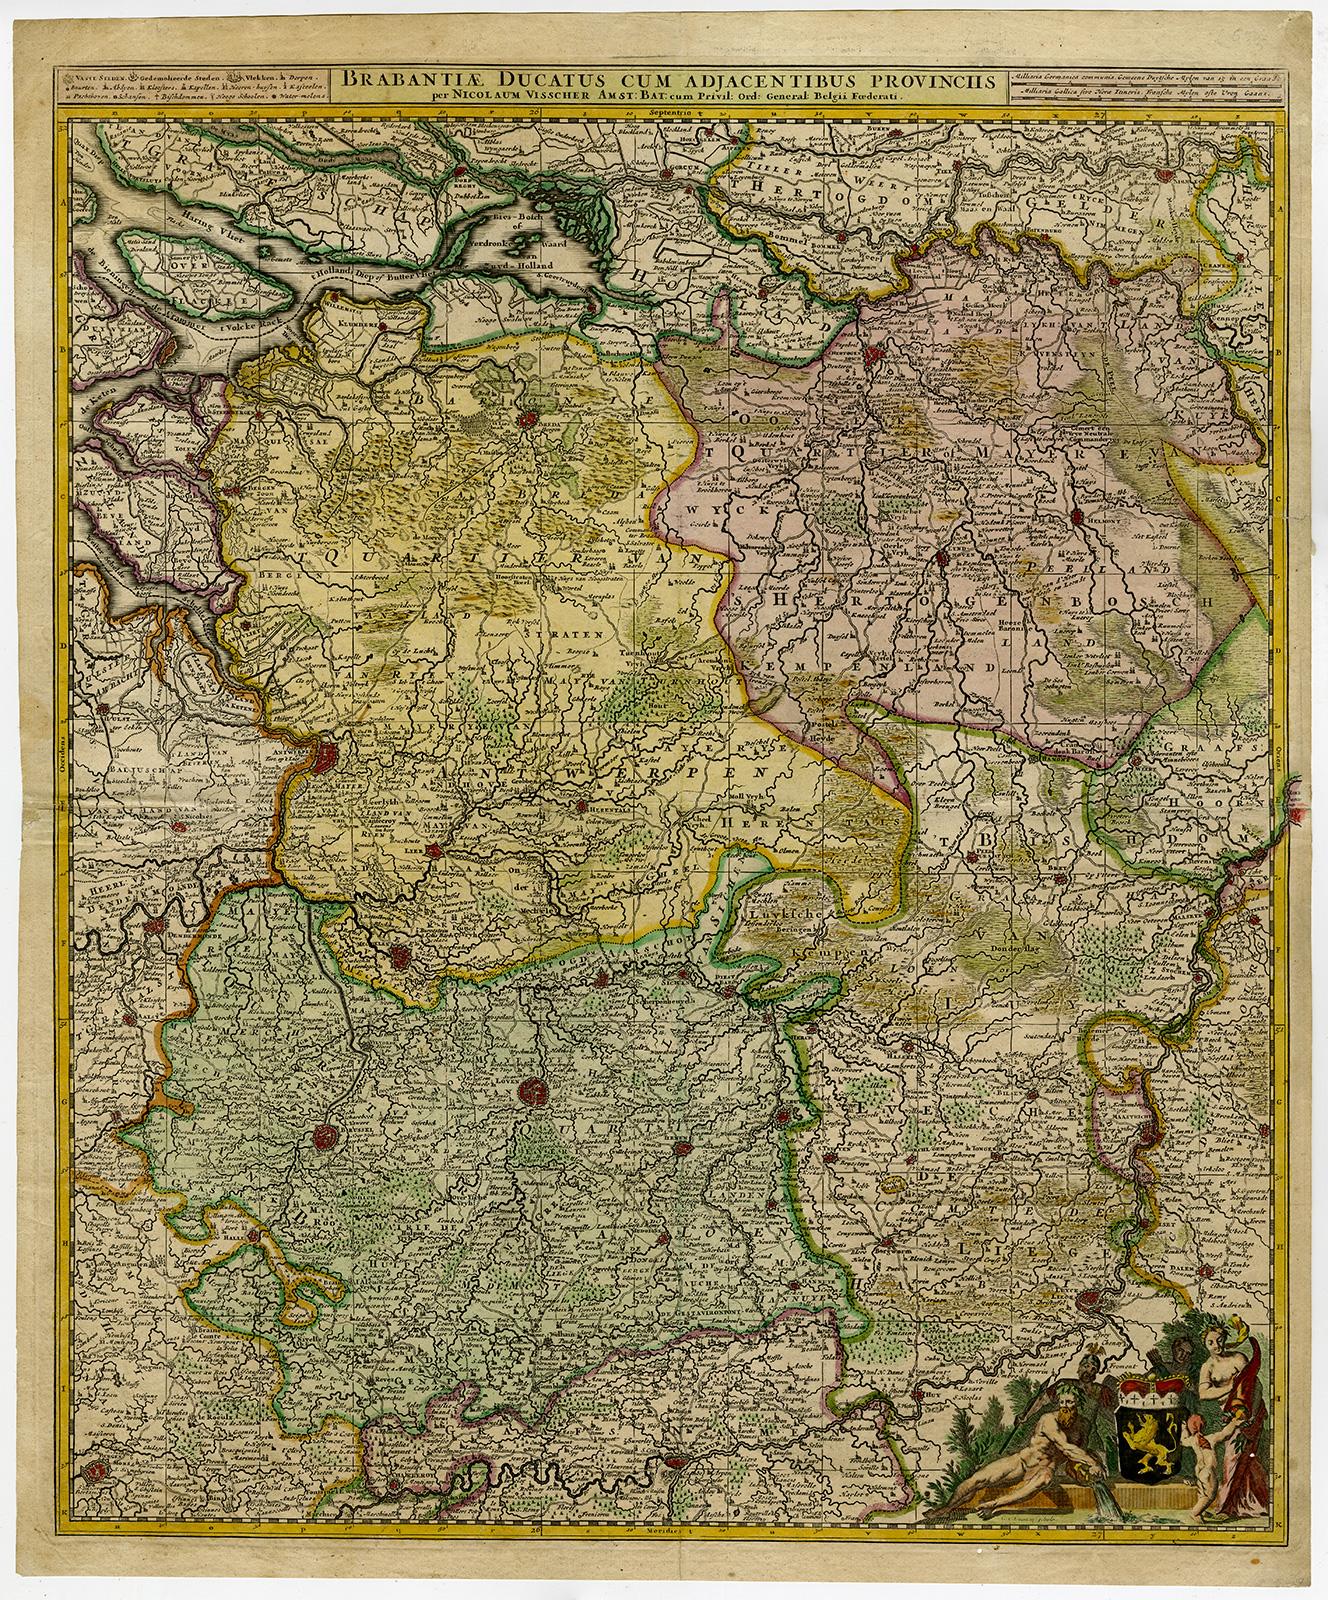 Antique map of Duchy of Brabant by Visscher - Handcoloured engraving - 17th c. - Print by Nicolaus Visscher